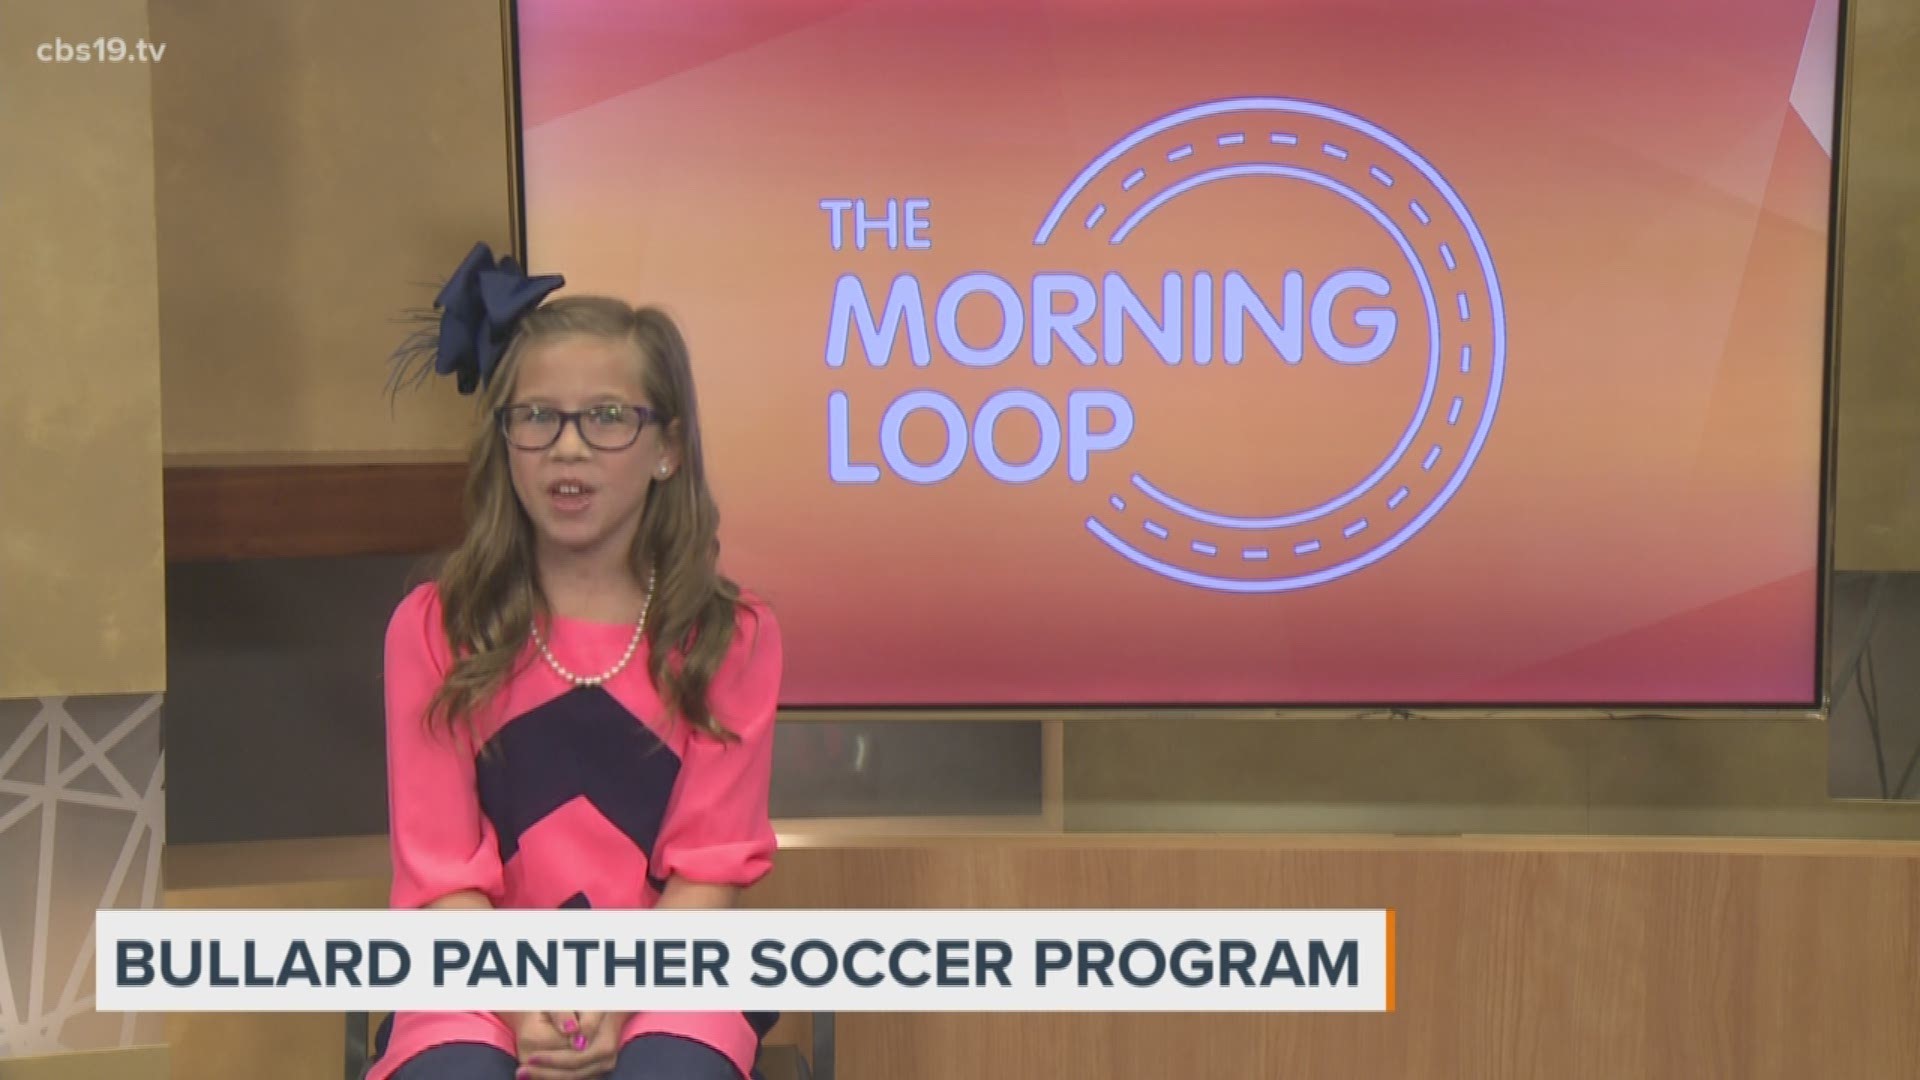 Ellie Wildt stopped by CBS19 to give this week's Kid Report. Ellie is a fourth grader a Bullard Elementary. She loves playing soccer! She also enjoys theater, singing and dancing. Ellie is looking forward to spending time with her family this summer and g